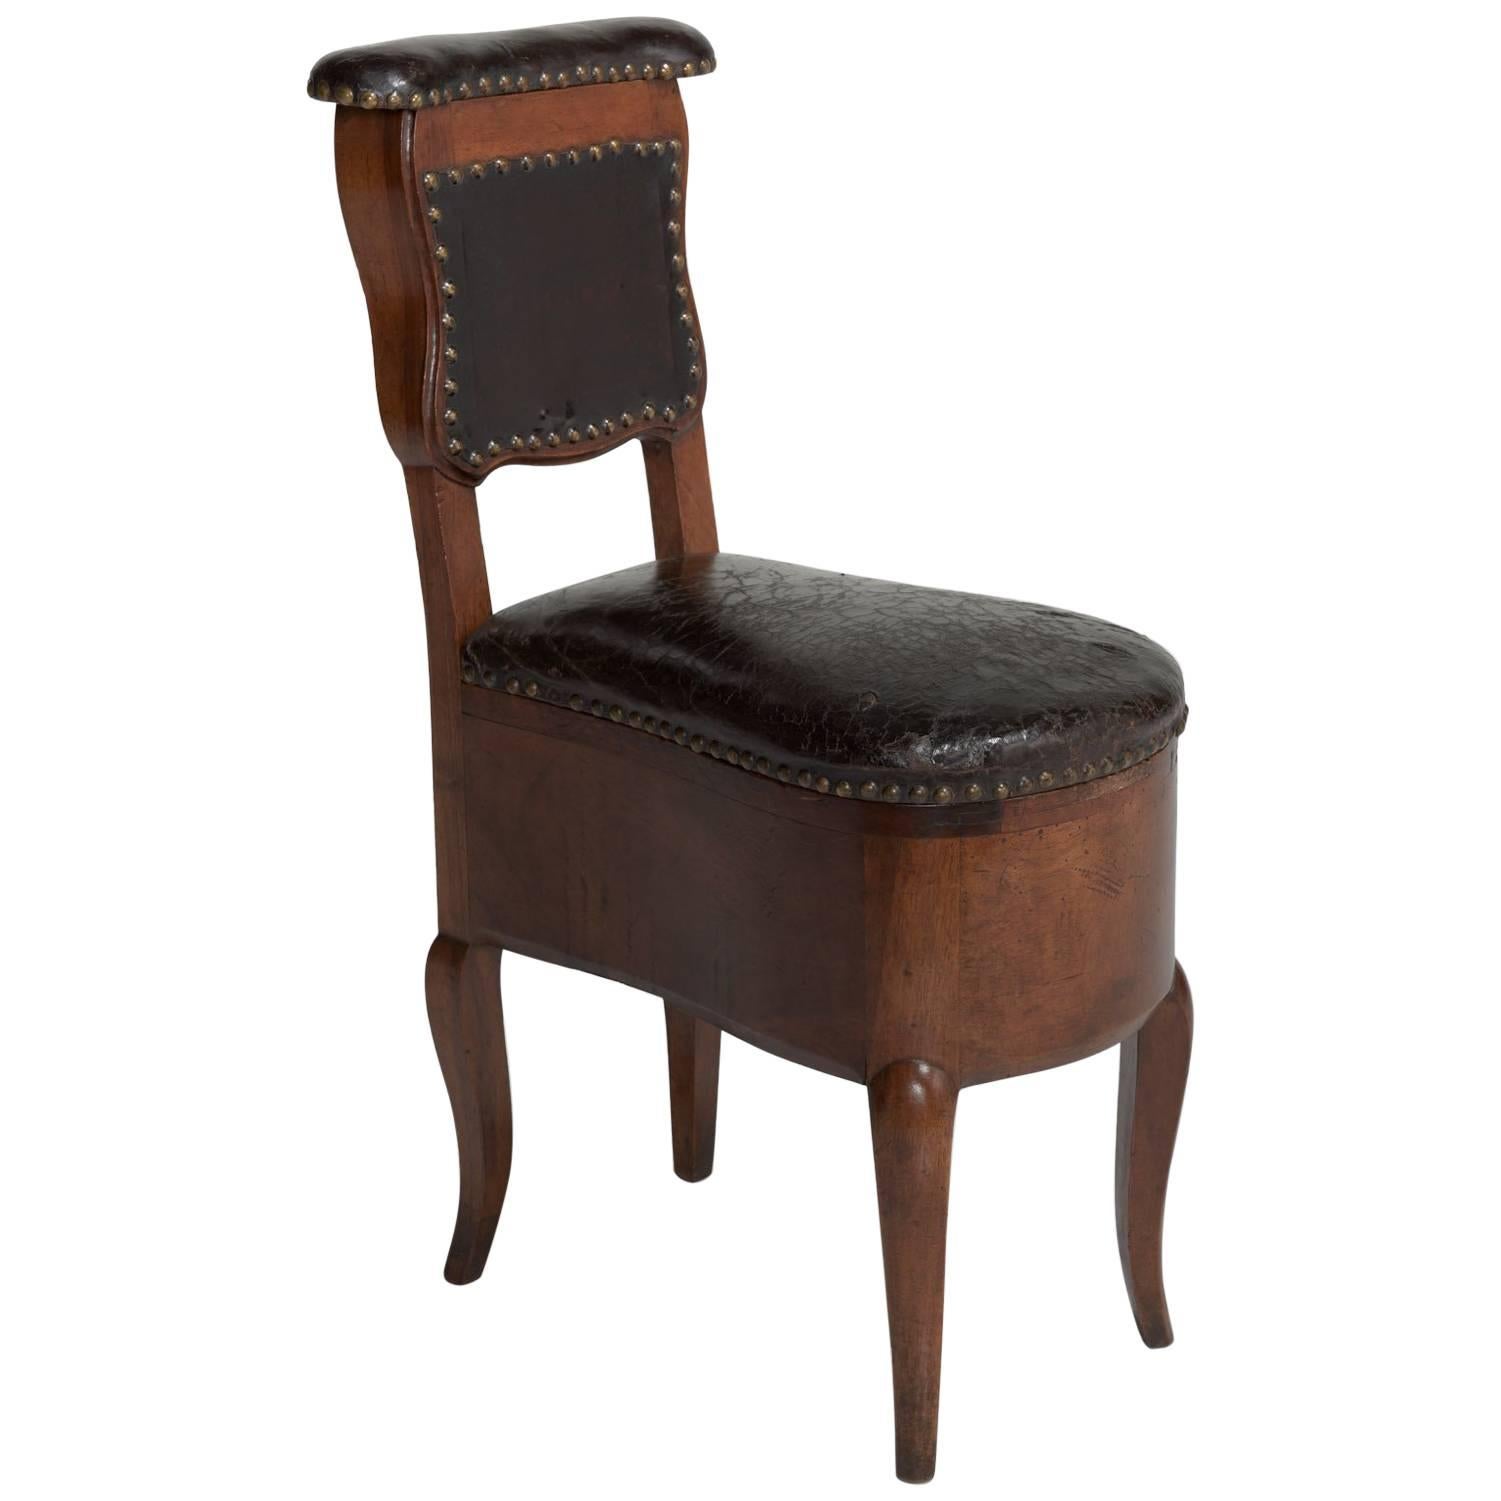 Mahogany and Leather Prie Dieu Chair, France, circa 1780